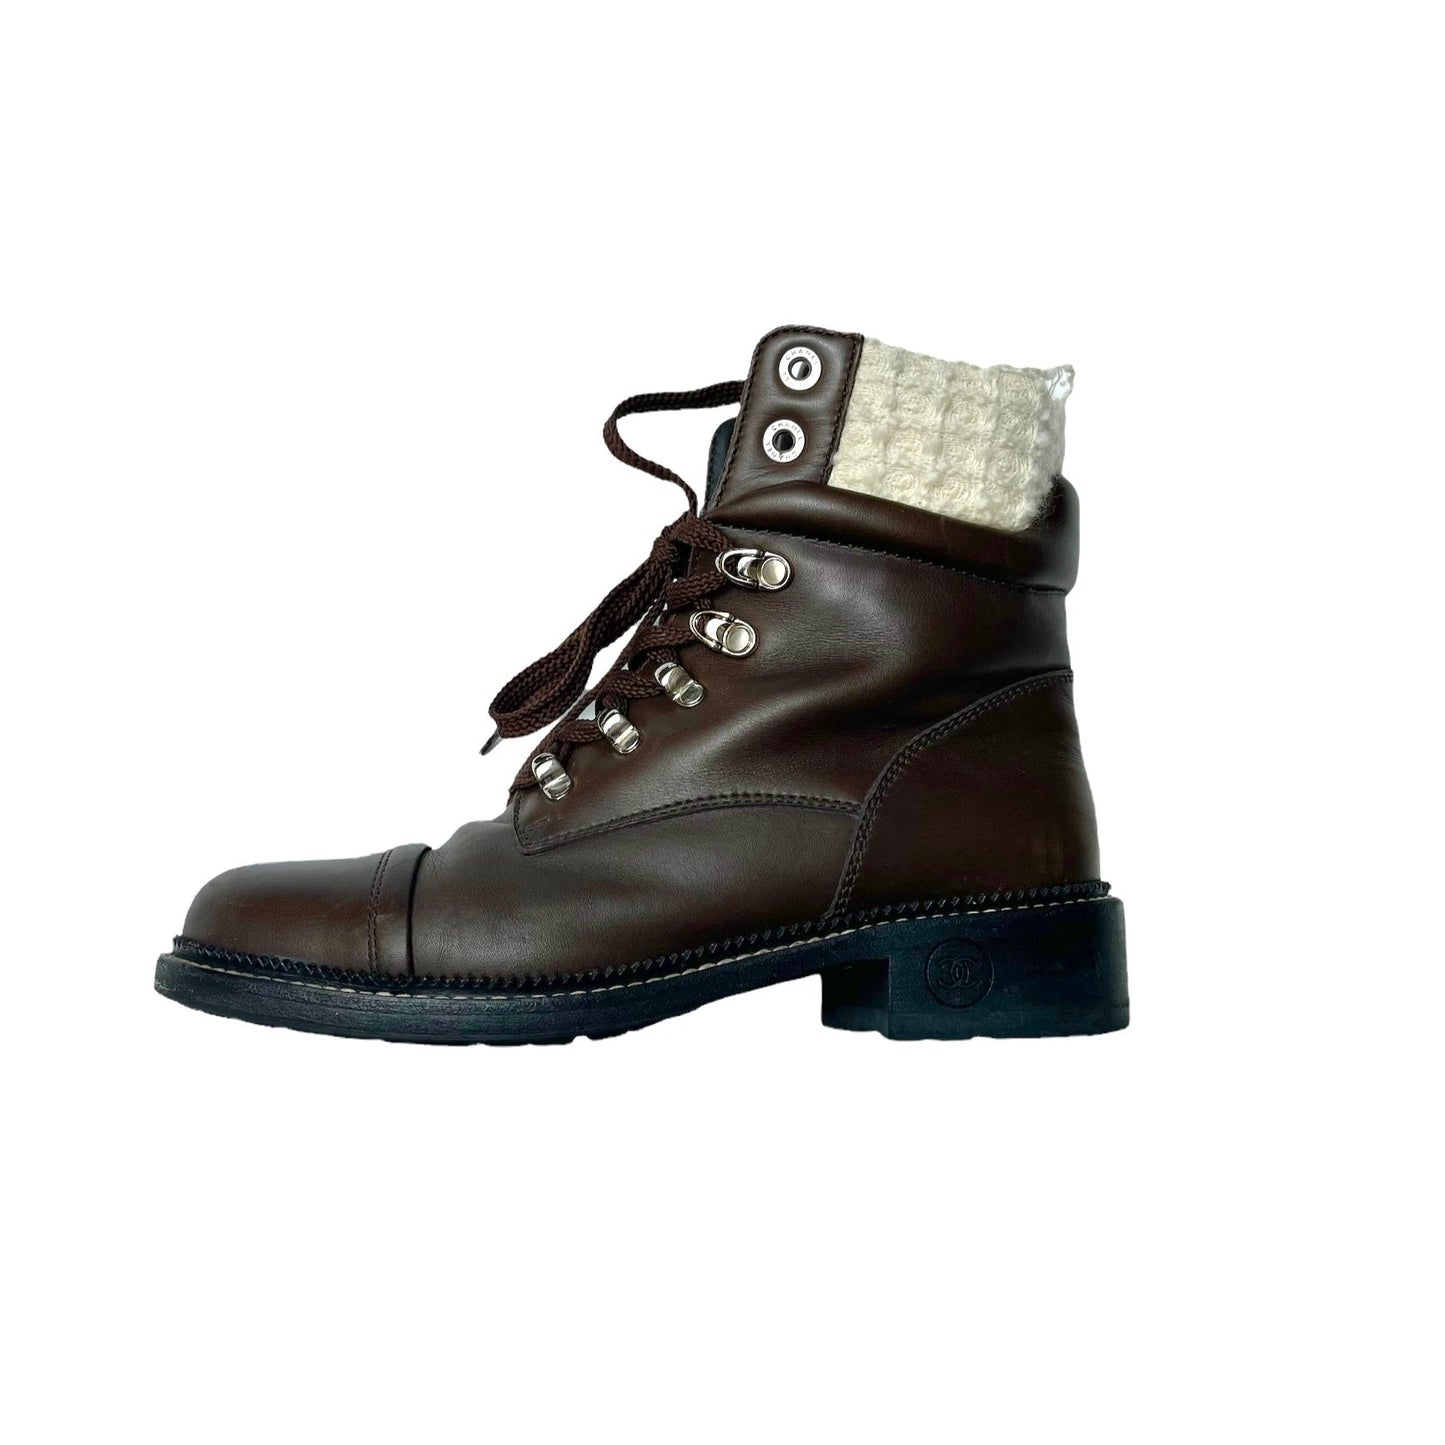 Brown Leather Combat Boots - 8